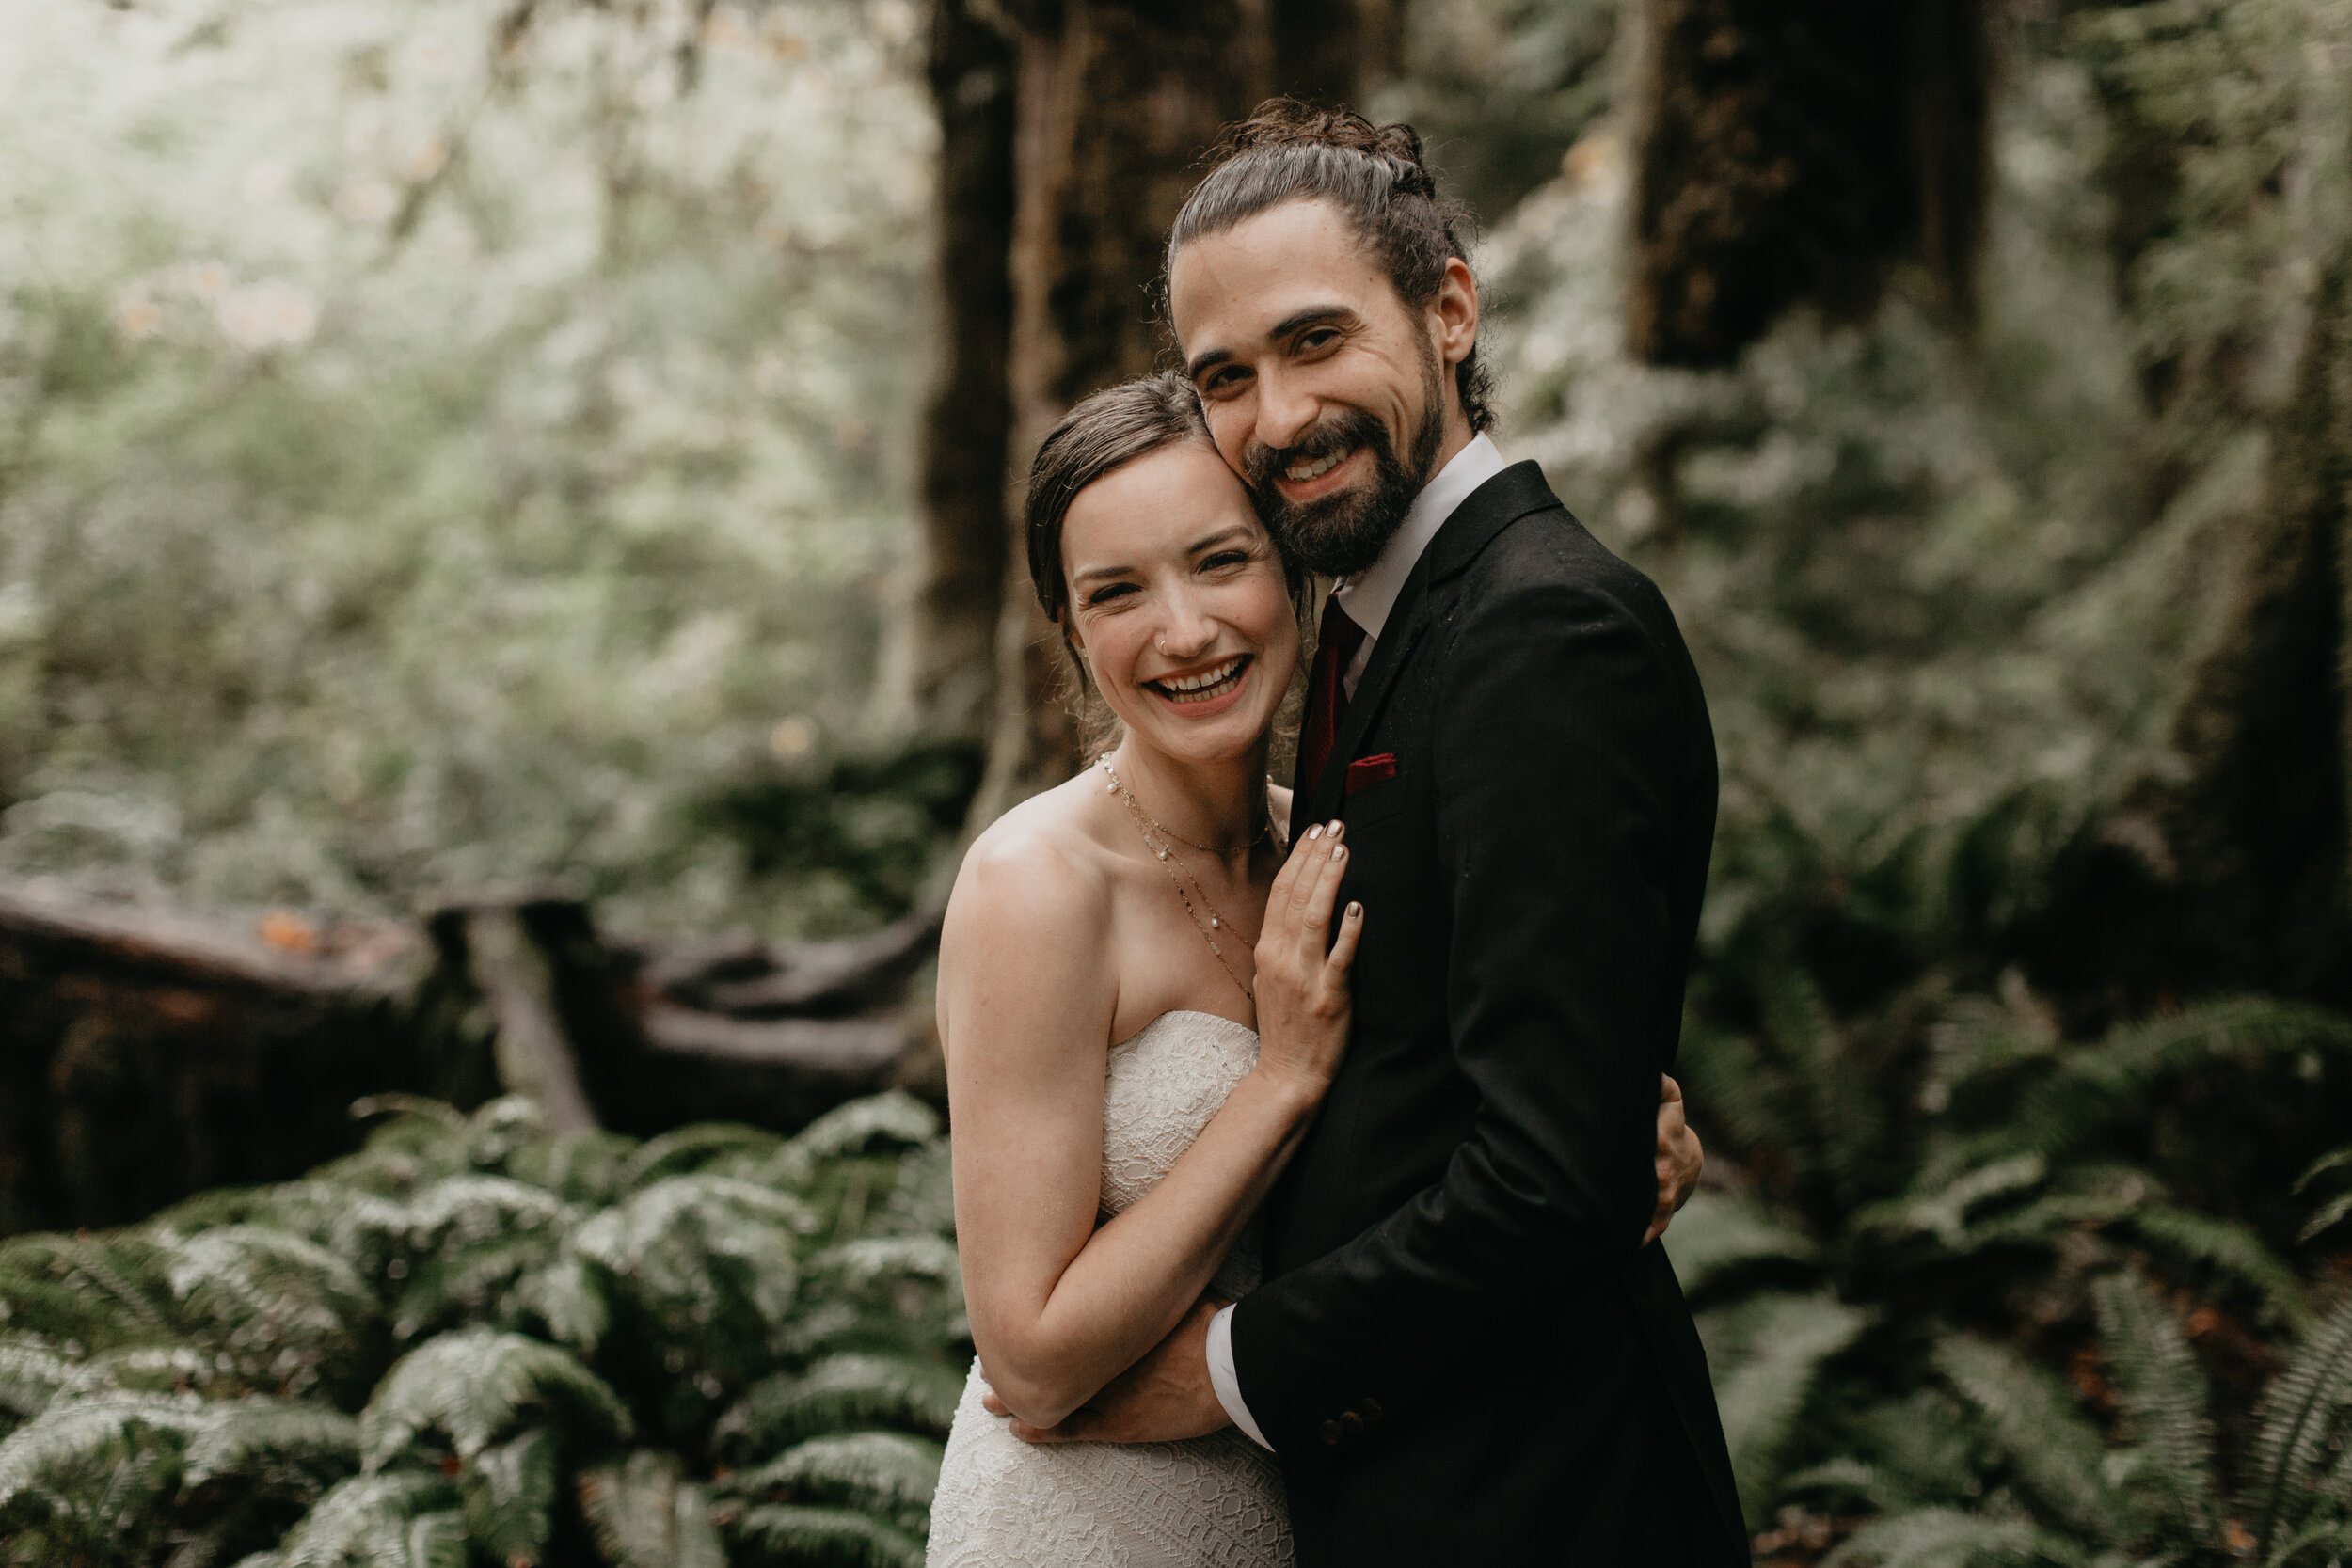 Nicole-Daacke-Photography-Olympic-national-park-elopement-photography-intimiate-elopement-in-olympic-peninsula-washington-state-rainy-day-ruby-beach-hoh-rainforest-elopement-inspiration-rainforest-pnw-elopement-photography-134.jpg